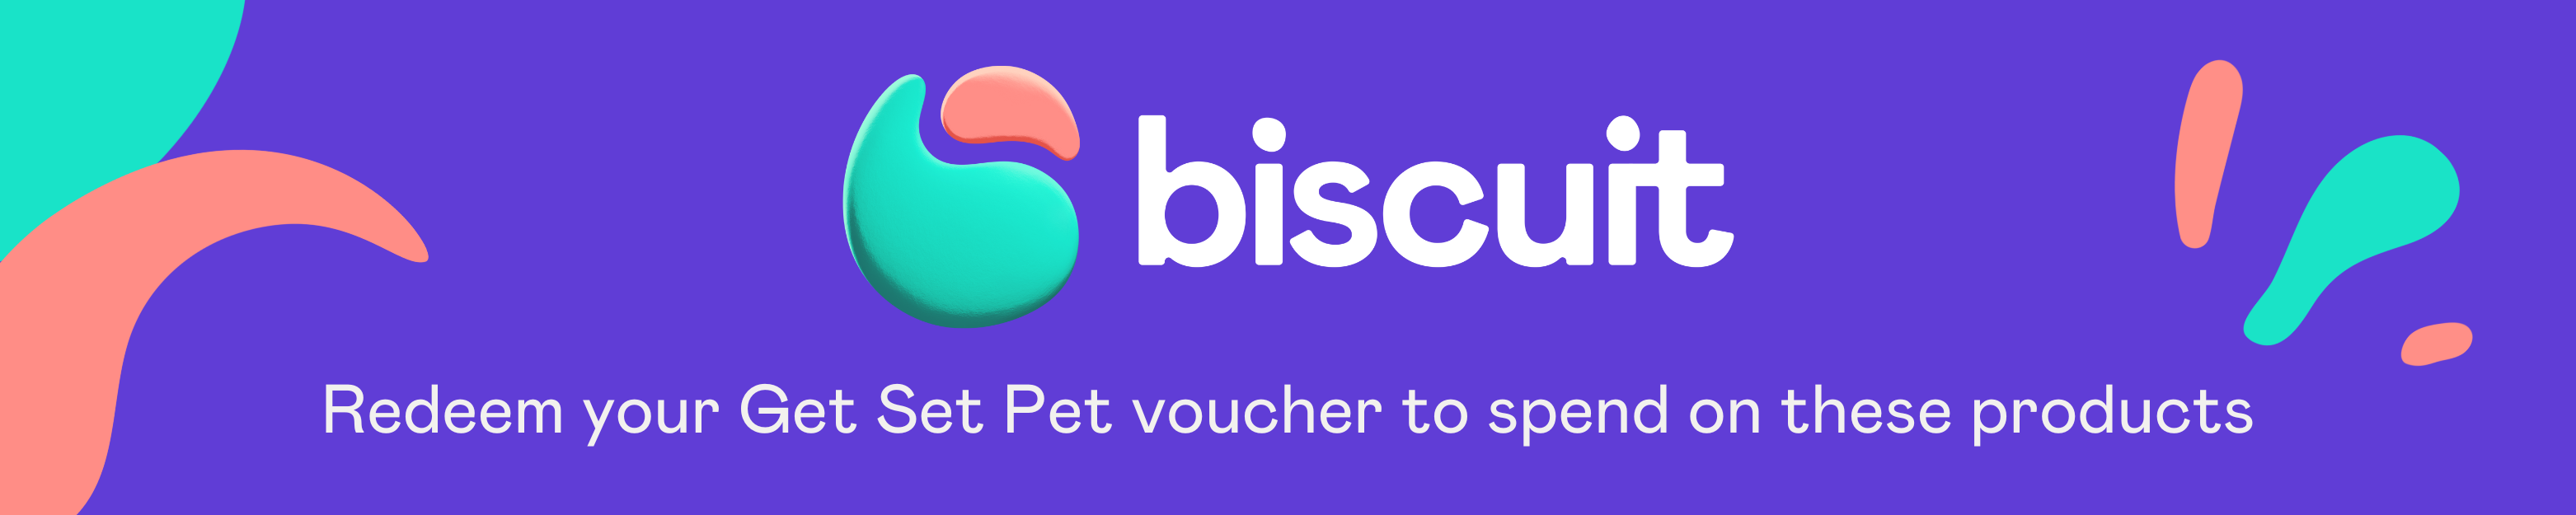 Biscuit Landing Page Banner